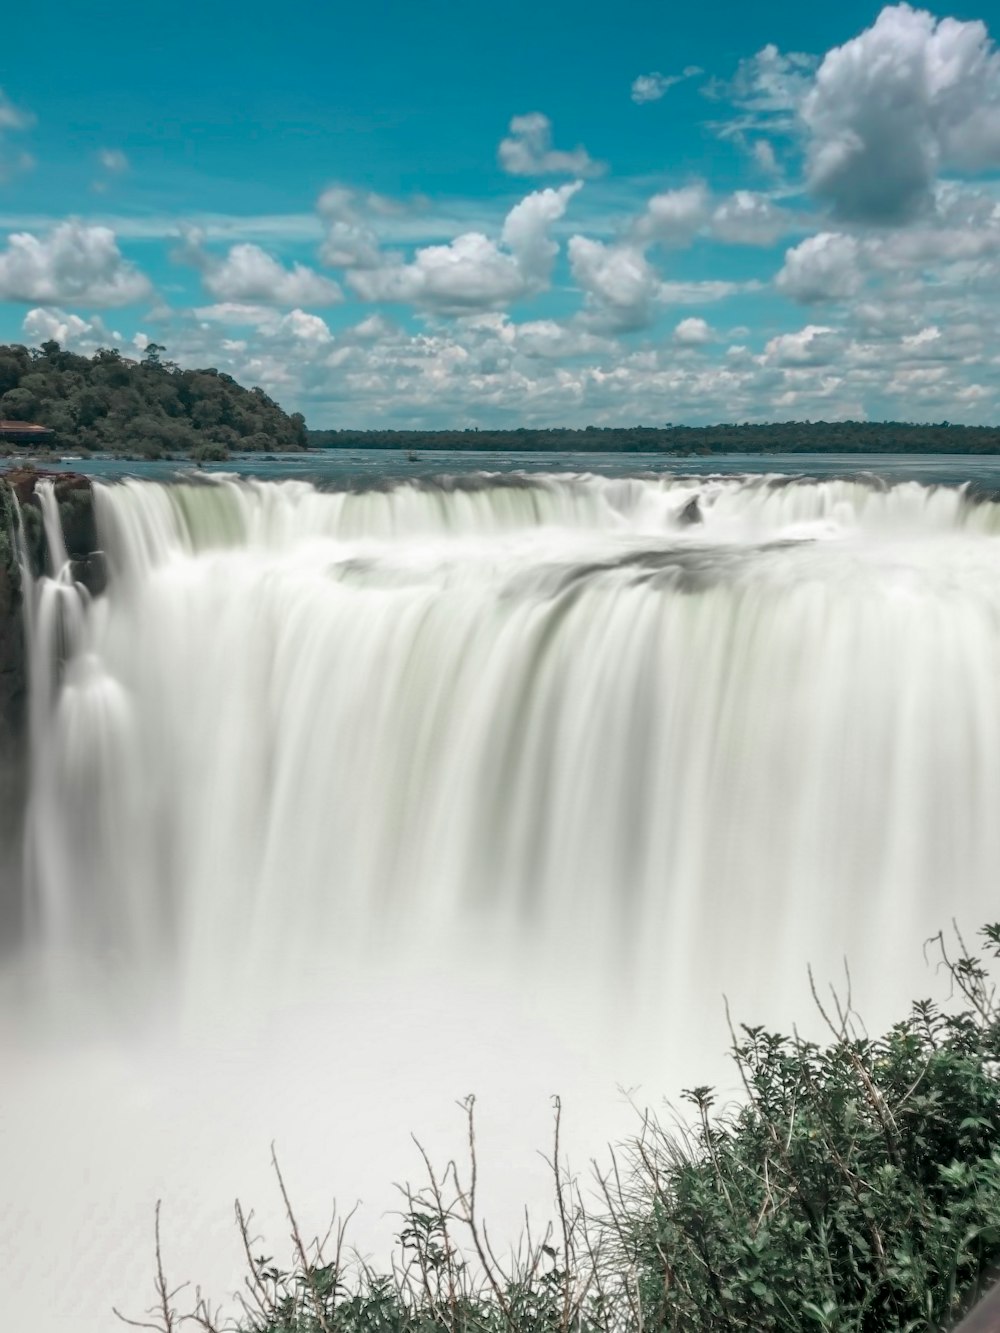 water falls under blue sky and white clouds during daytime